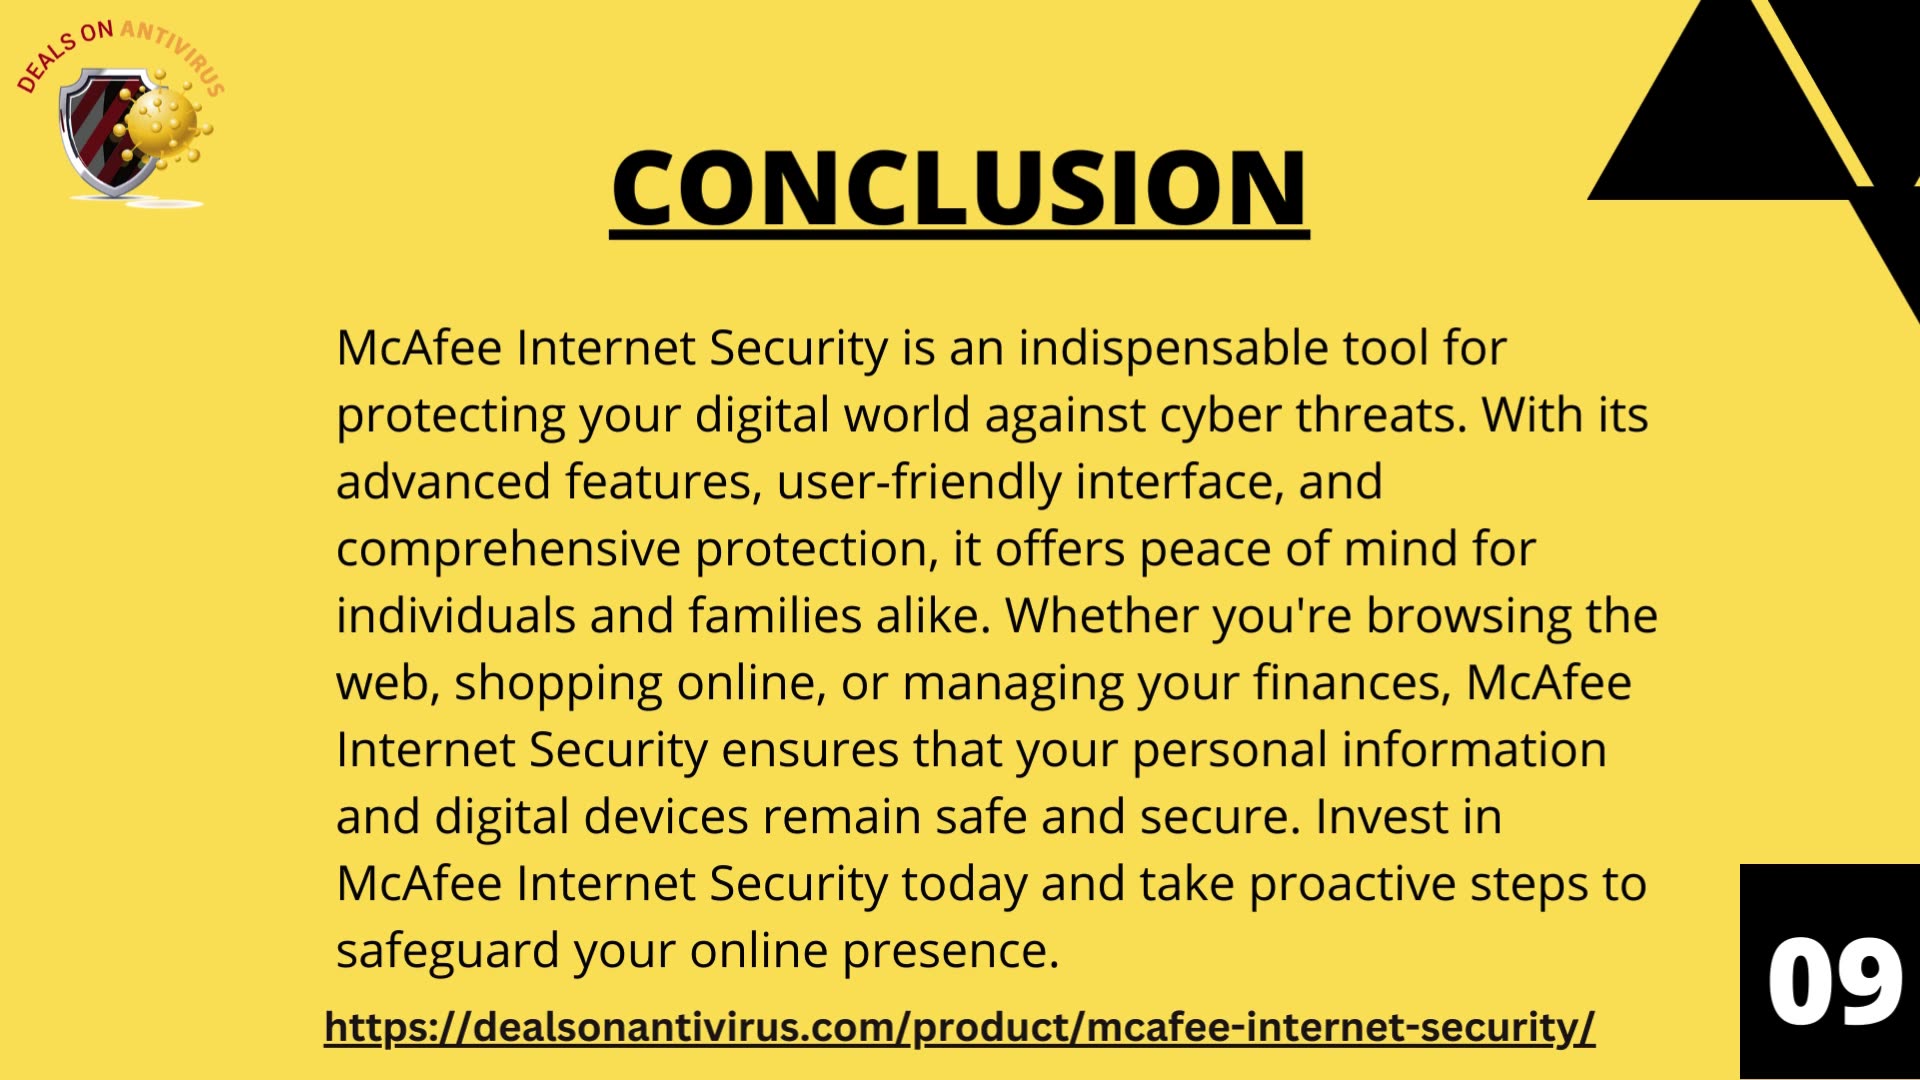 McAfee Internet Security Protecting Your Digital World